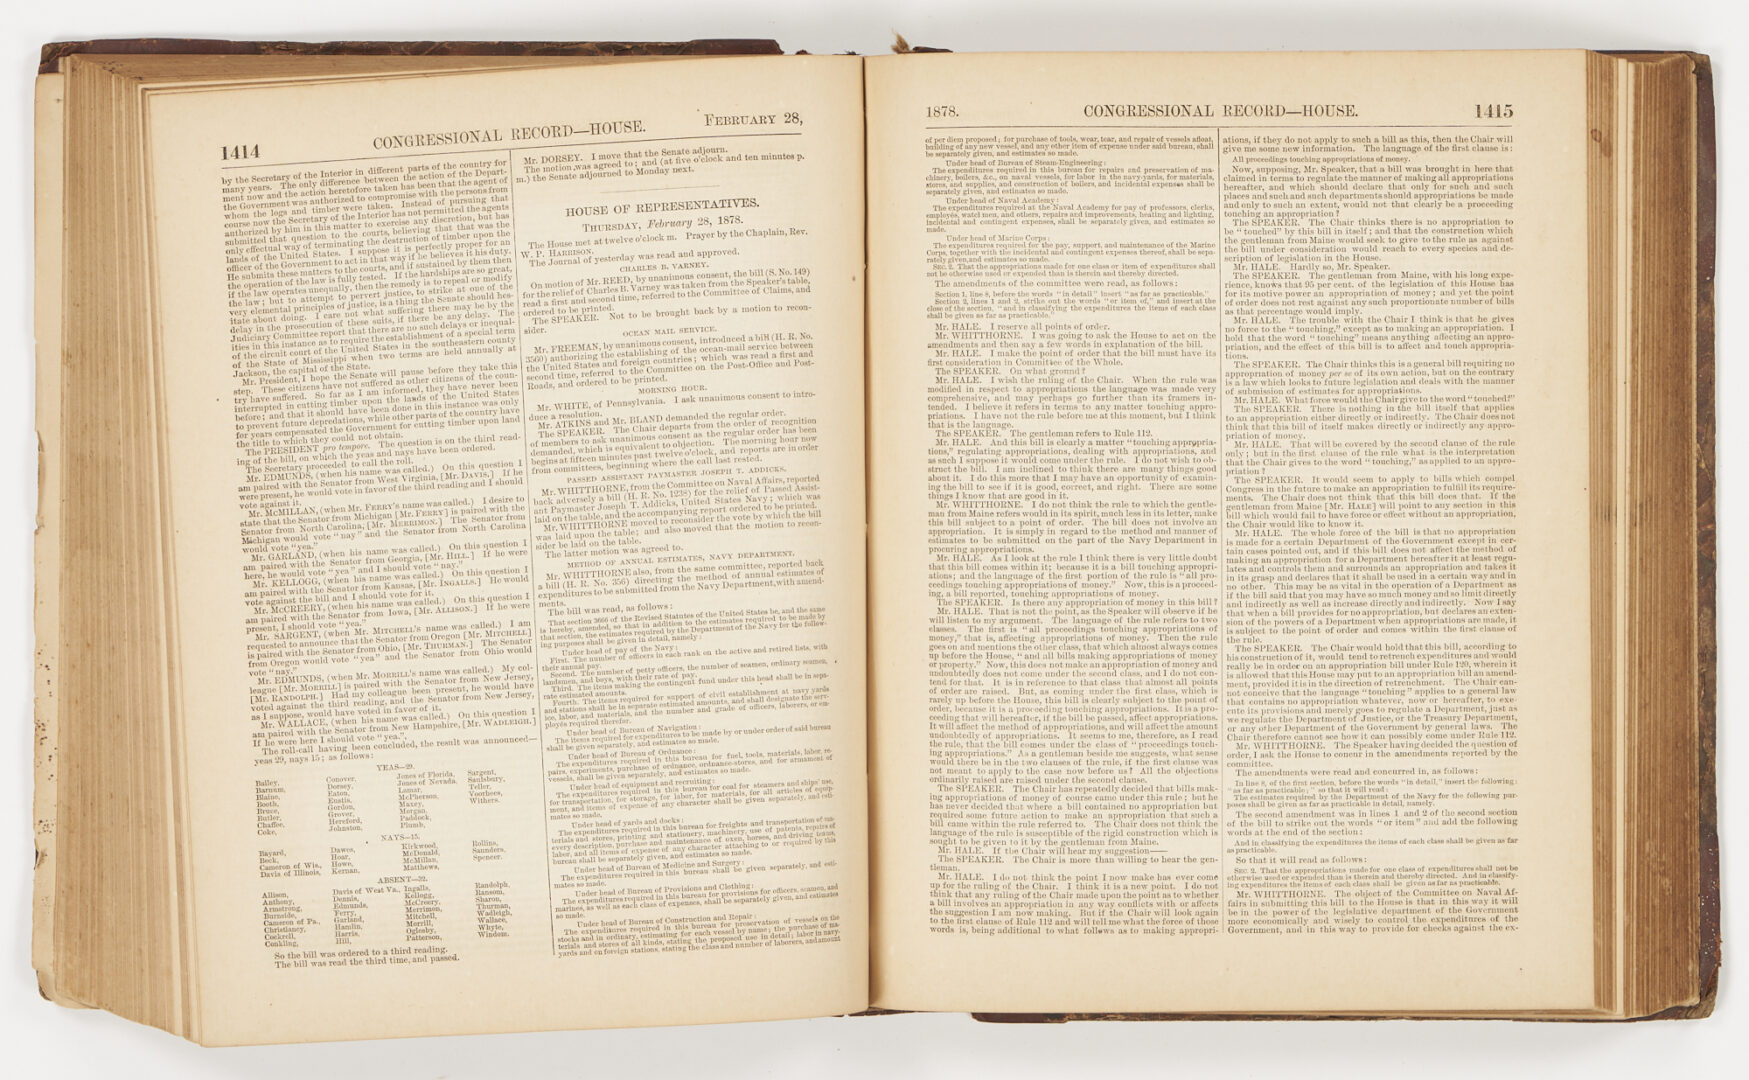 Lot 604: 6 East TN Mexican War Related Letters, 2 U.S. Pension Forms & 1878 Congressional Record